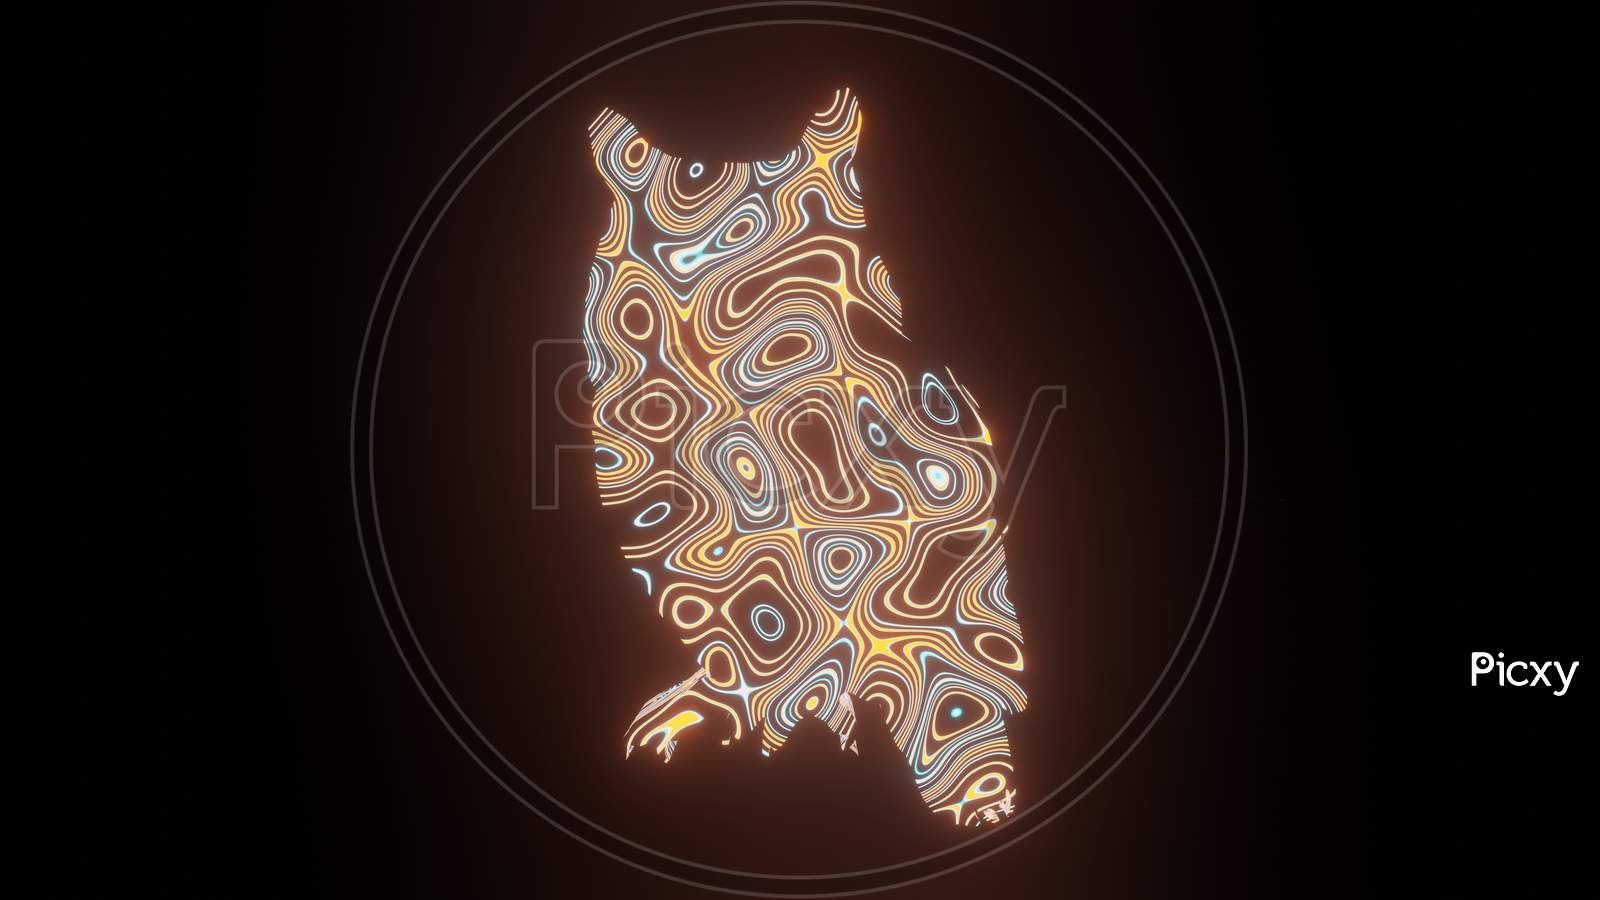 Illustration Graphic Of Beautiful Texture Or Pattern Formation On The Owl Body Shape, Isolated On Black Background. 3D Rendering Abstract Loop Neon Lighting Effect On Owl Bird.